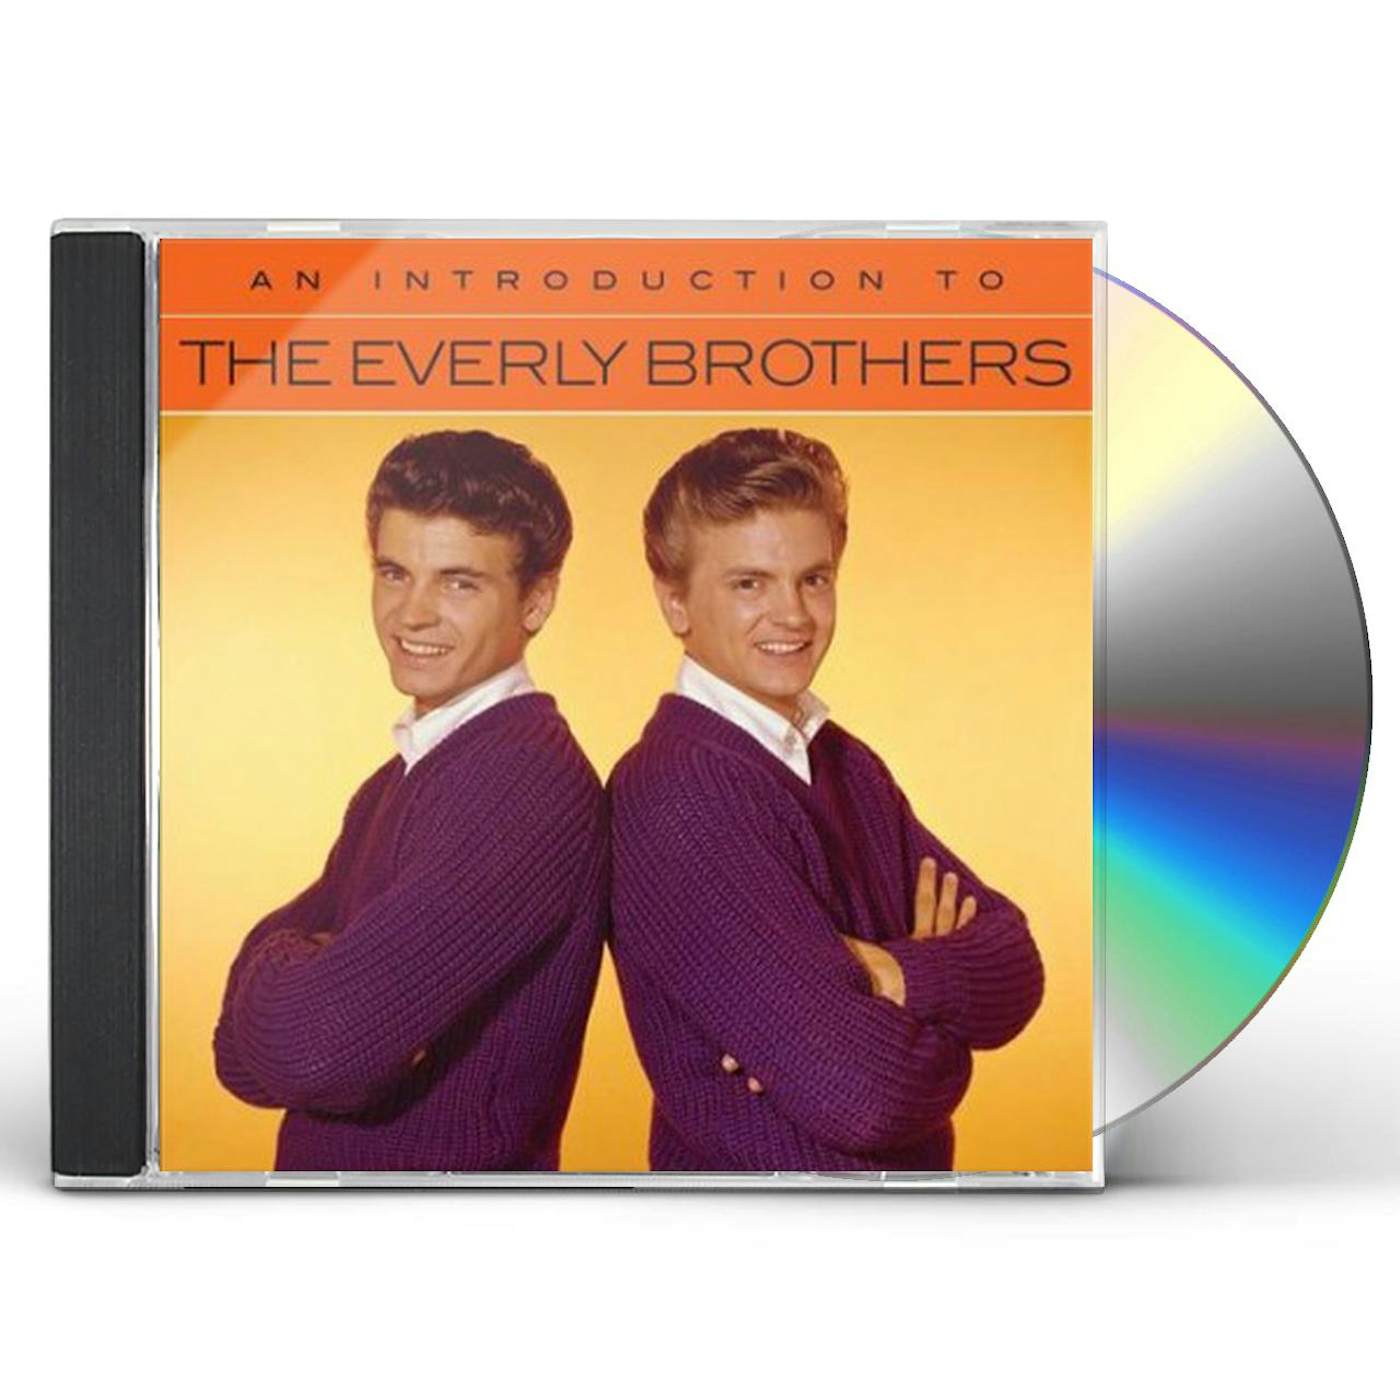 The Everly Brothers AN INTRODUCTION TO CD